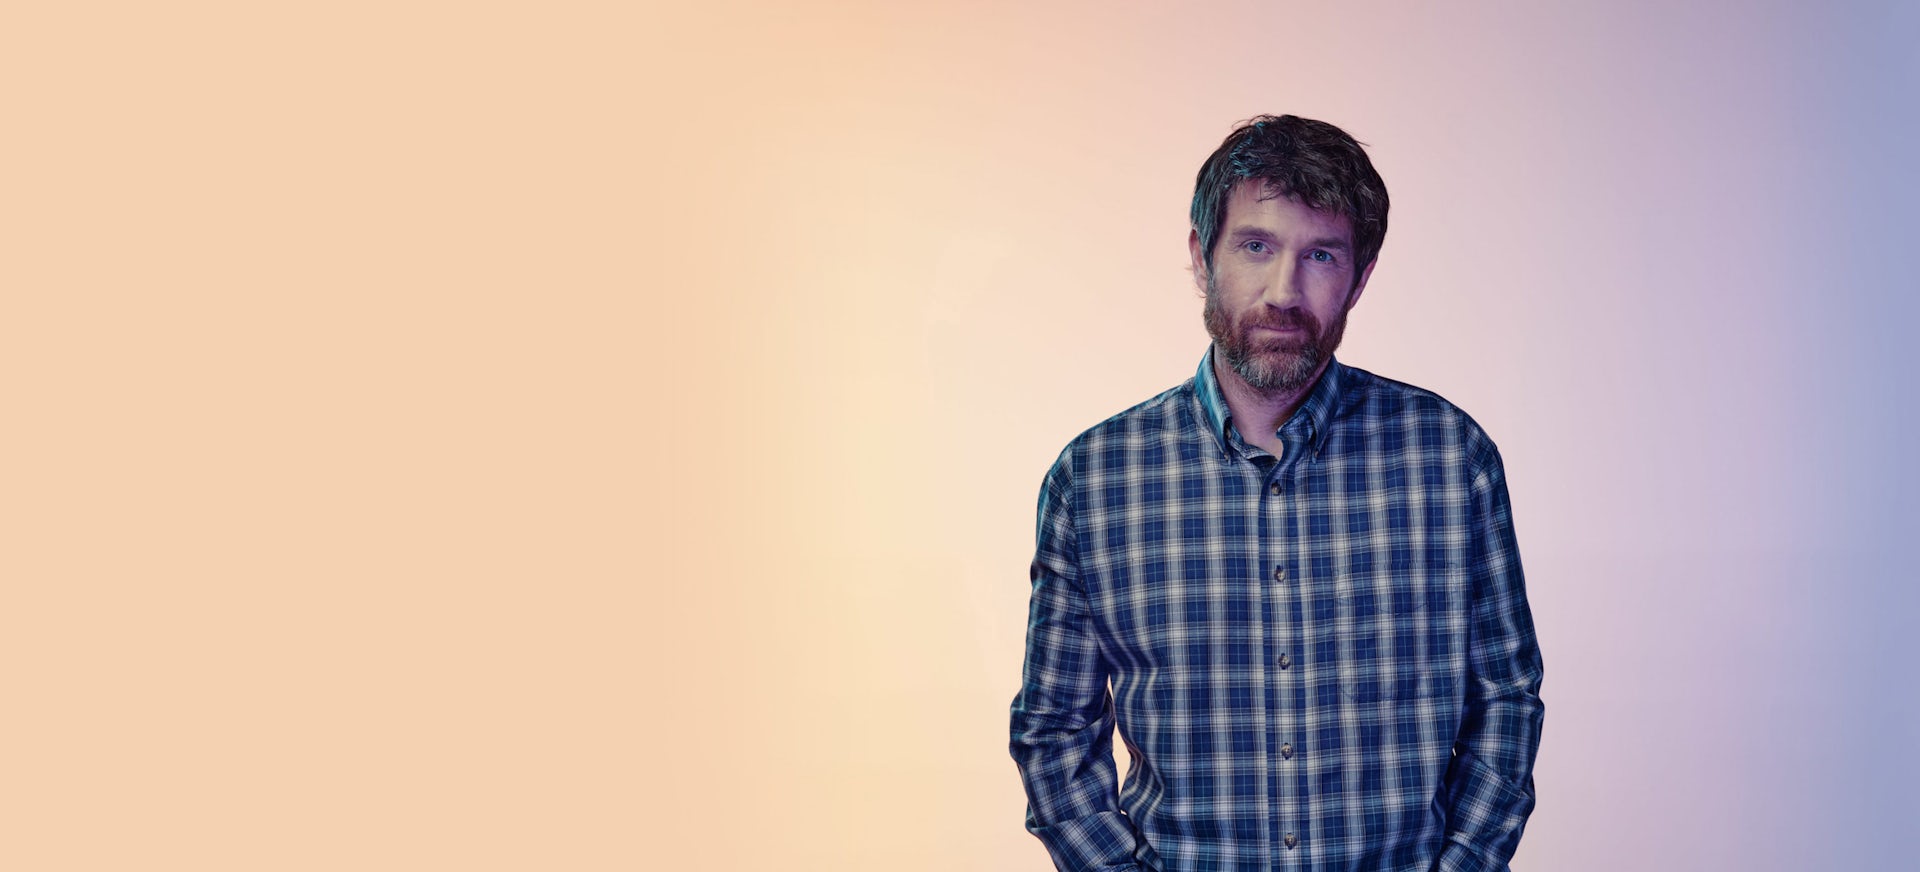 Man in plaid shirt standing with a light background behind him